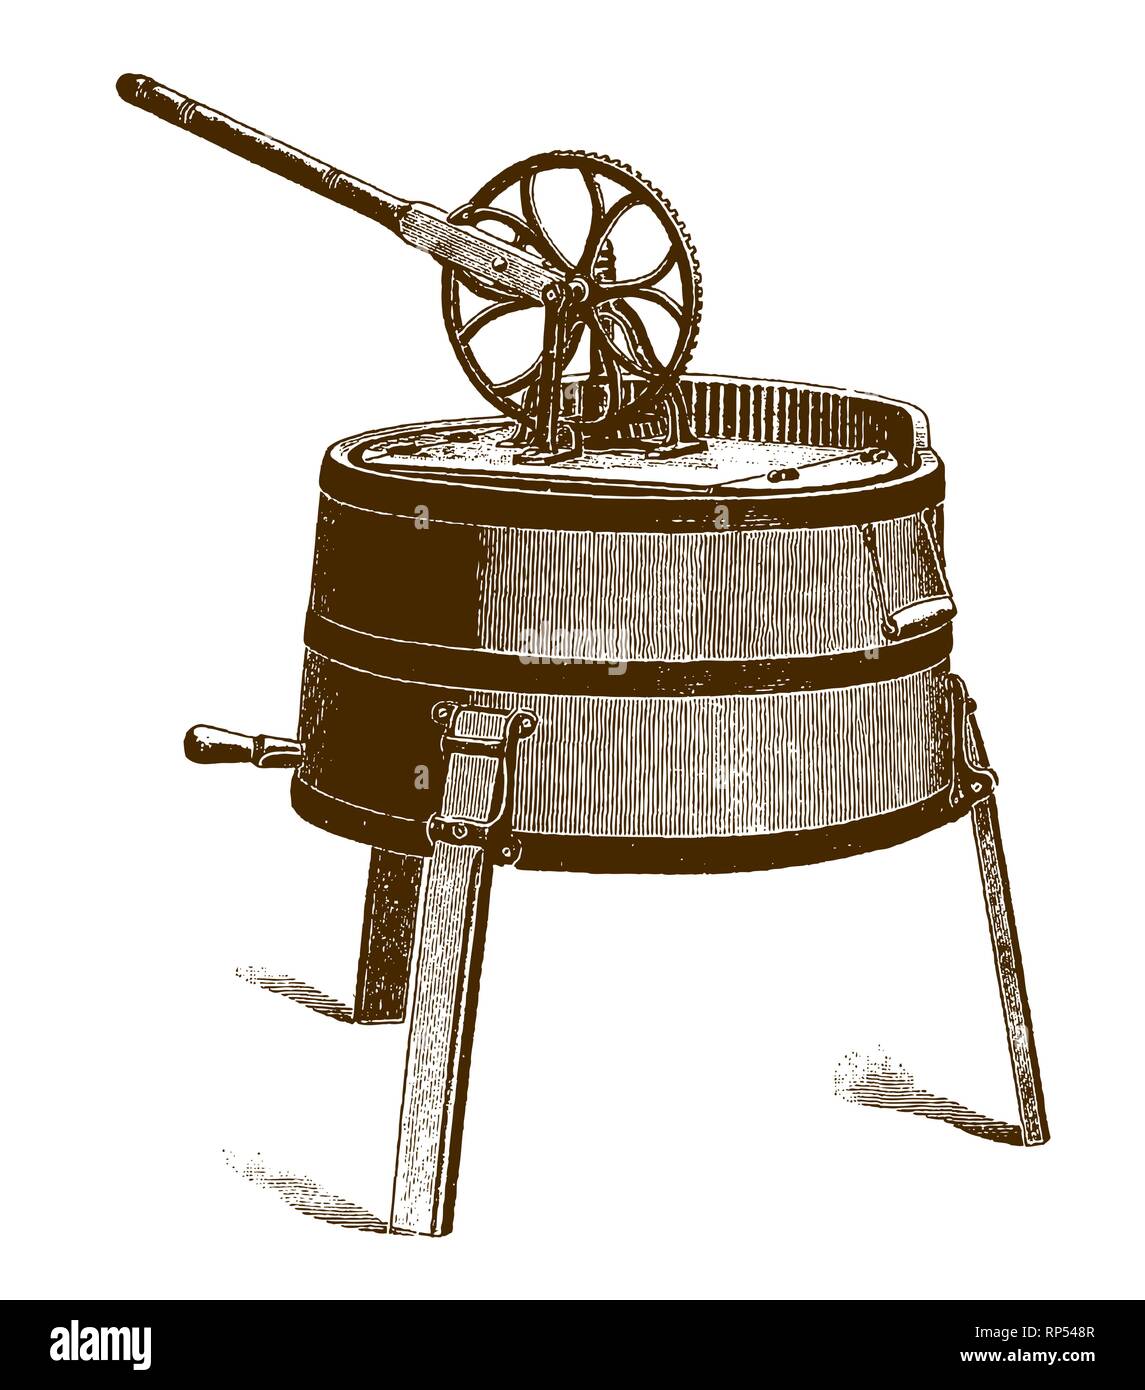 Antique mechanical washing machine, after an engraving or etching from the 19th century Stock Vector